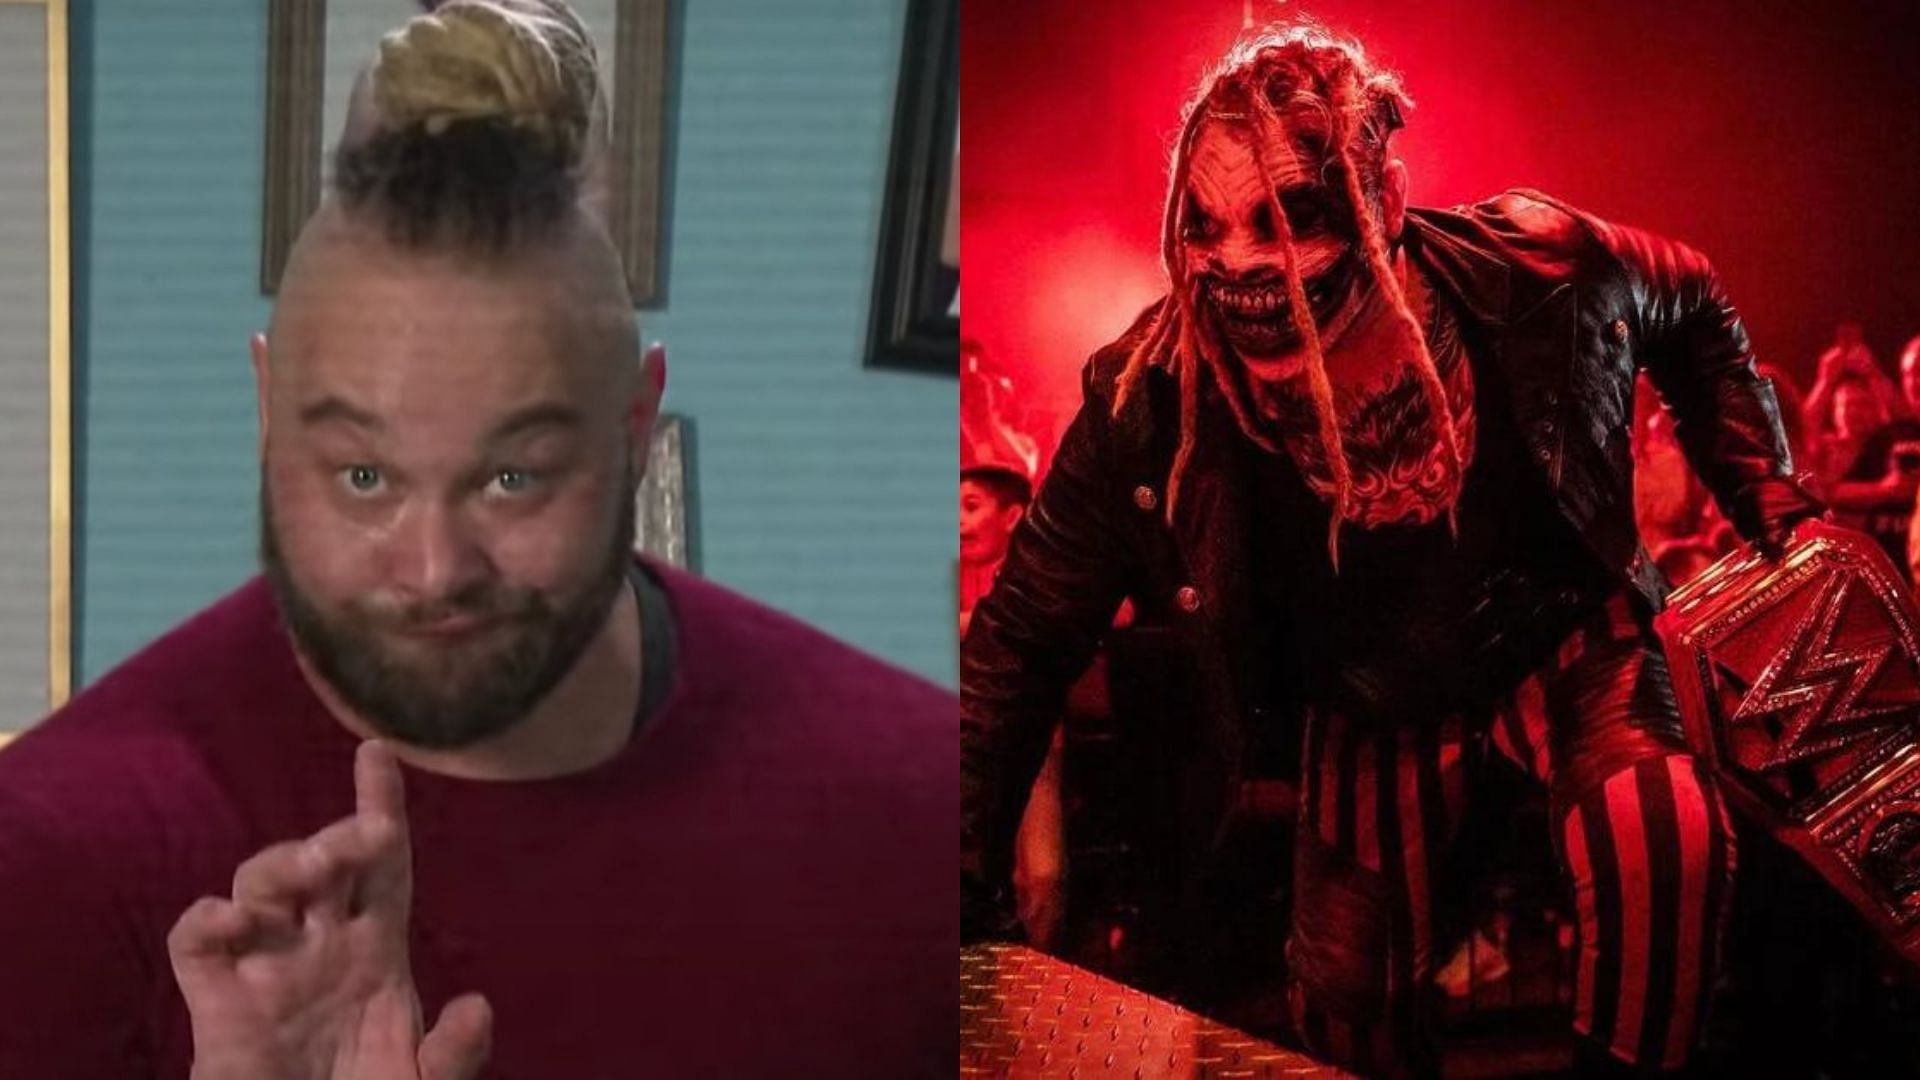 Is Bray Wyatt (The Fiend) close to making his WWE return?